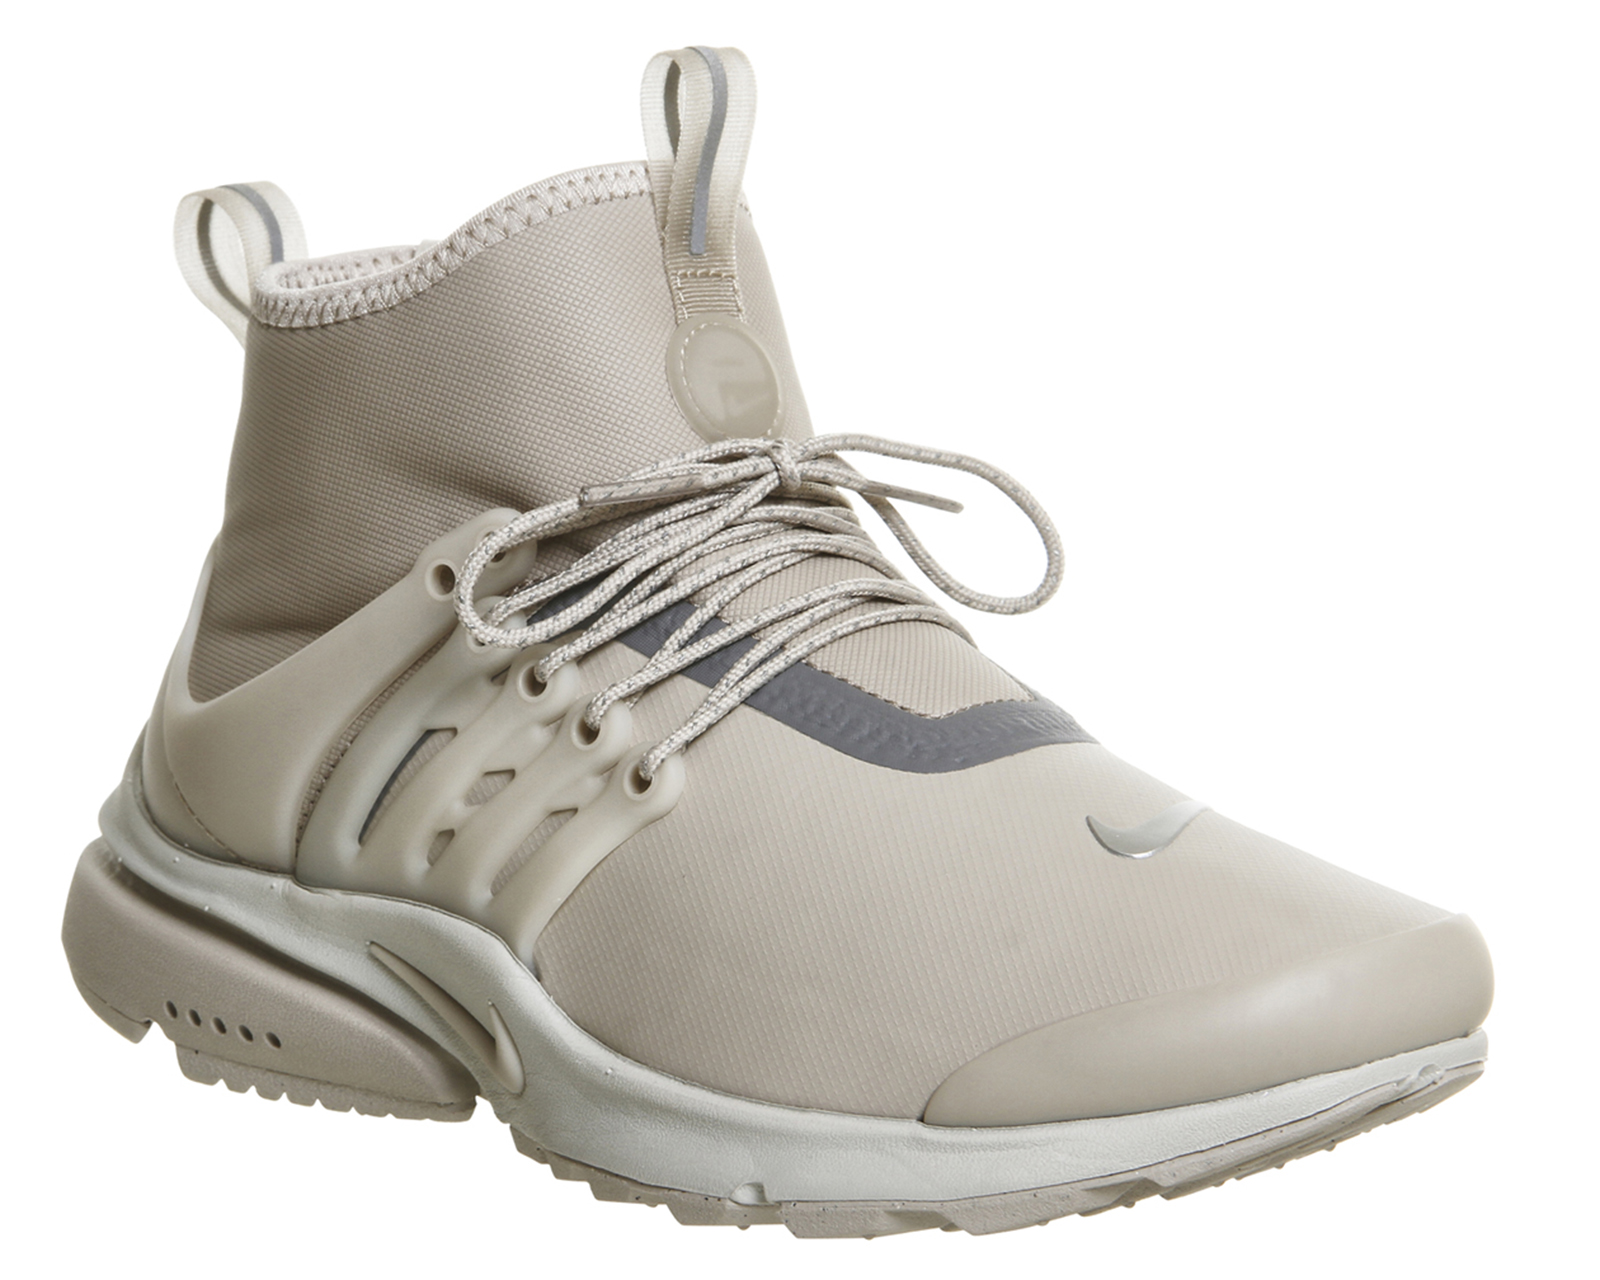 Nike Air Presto Mid Utility Wmns String Reflective Silver Bone - Hers  trainers